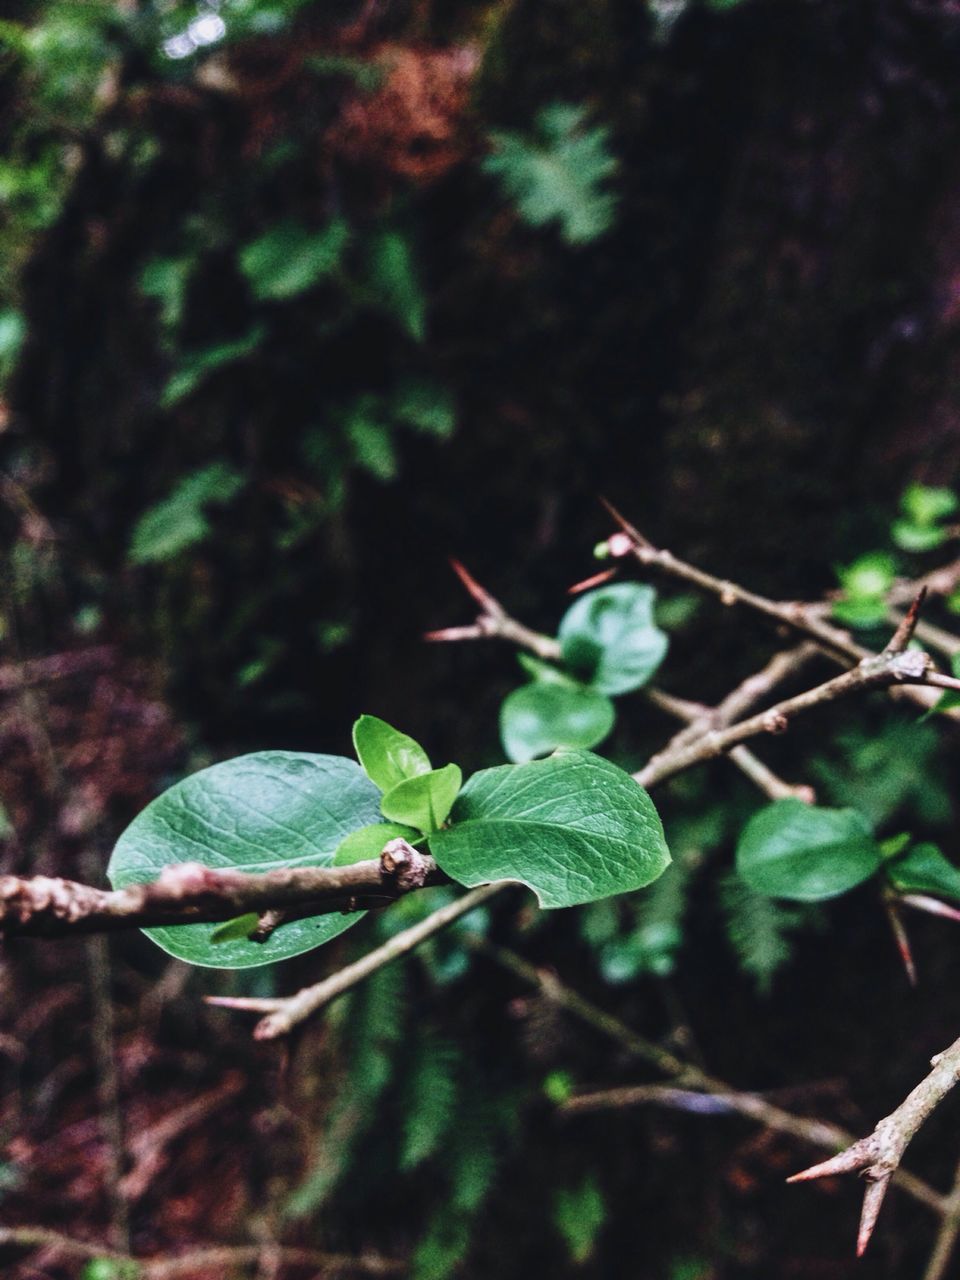 leaf, growth, focus on foreground, close-up, green color, plant, nature, beauty in nature, stem, selective focus, tranquility, growing, day, outdoors, fragility, twig, branch, green, no people, tree